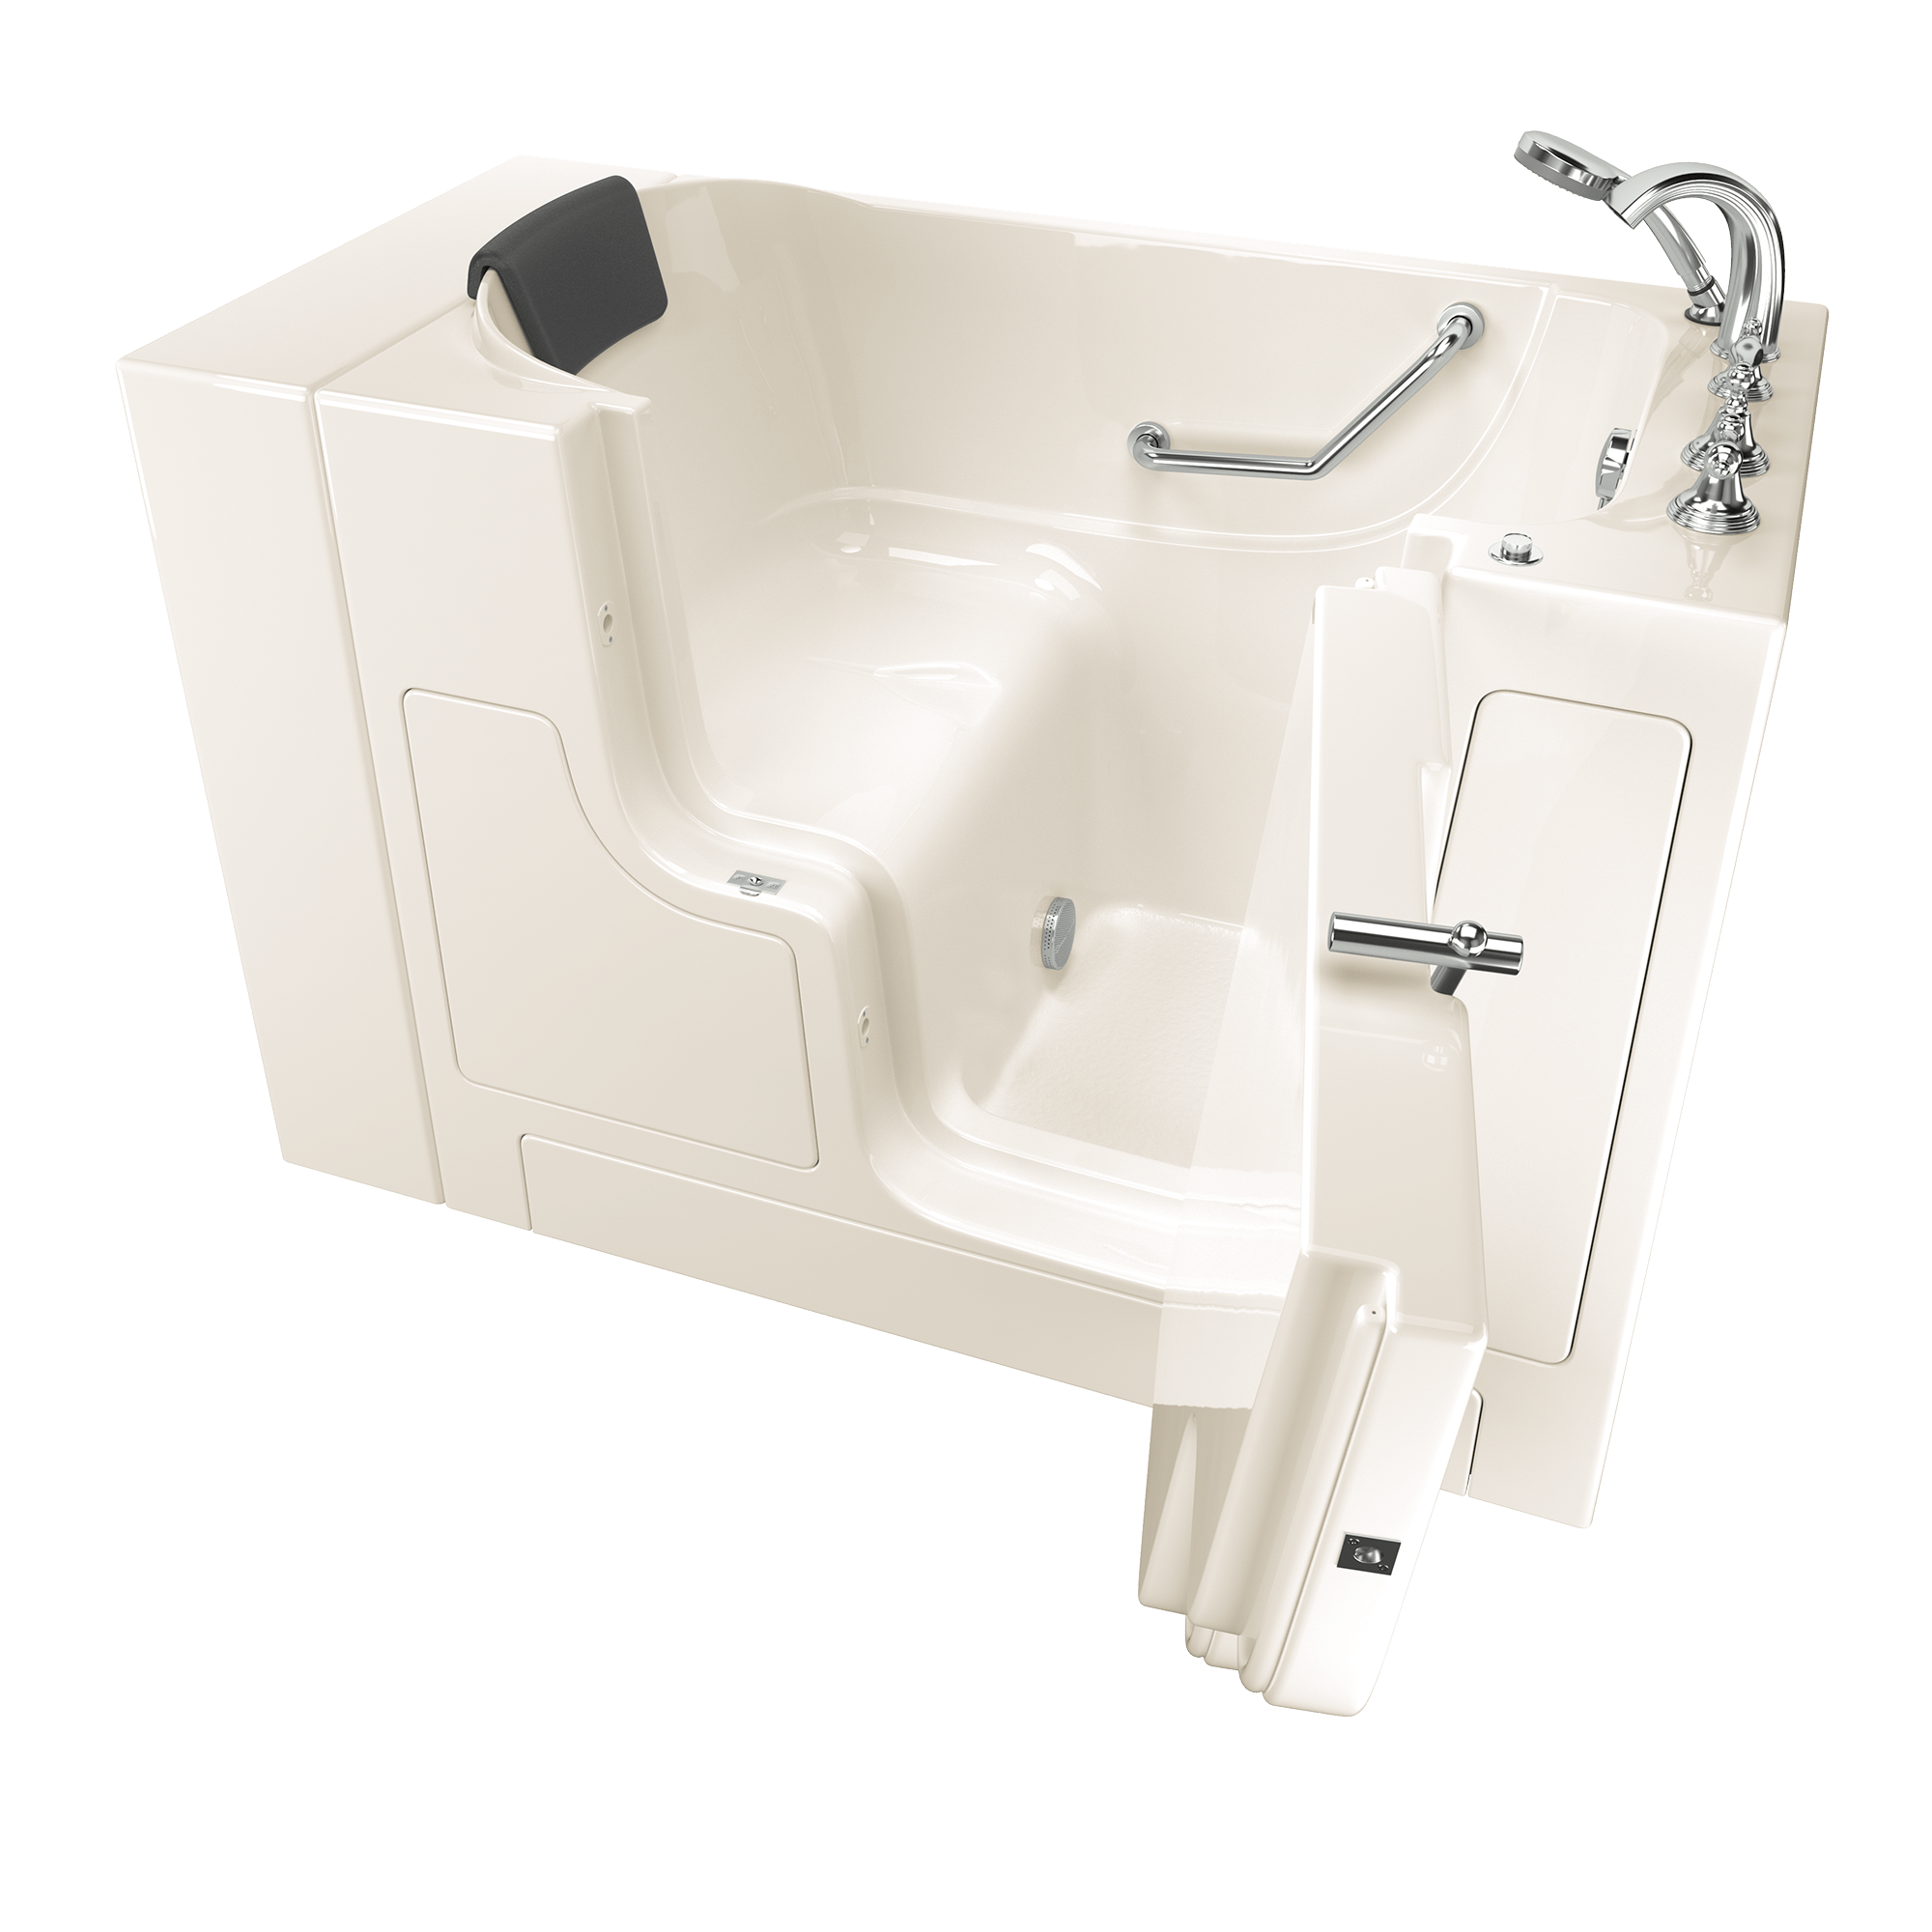 Gelcoat Premium Series 30 x 52  Inch Walk in Tub With Soaker System   Right Hand Drain With Faucet WIB LINEN